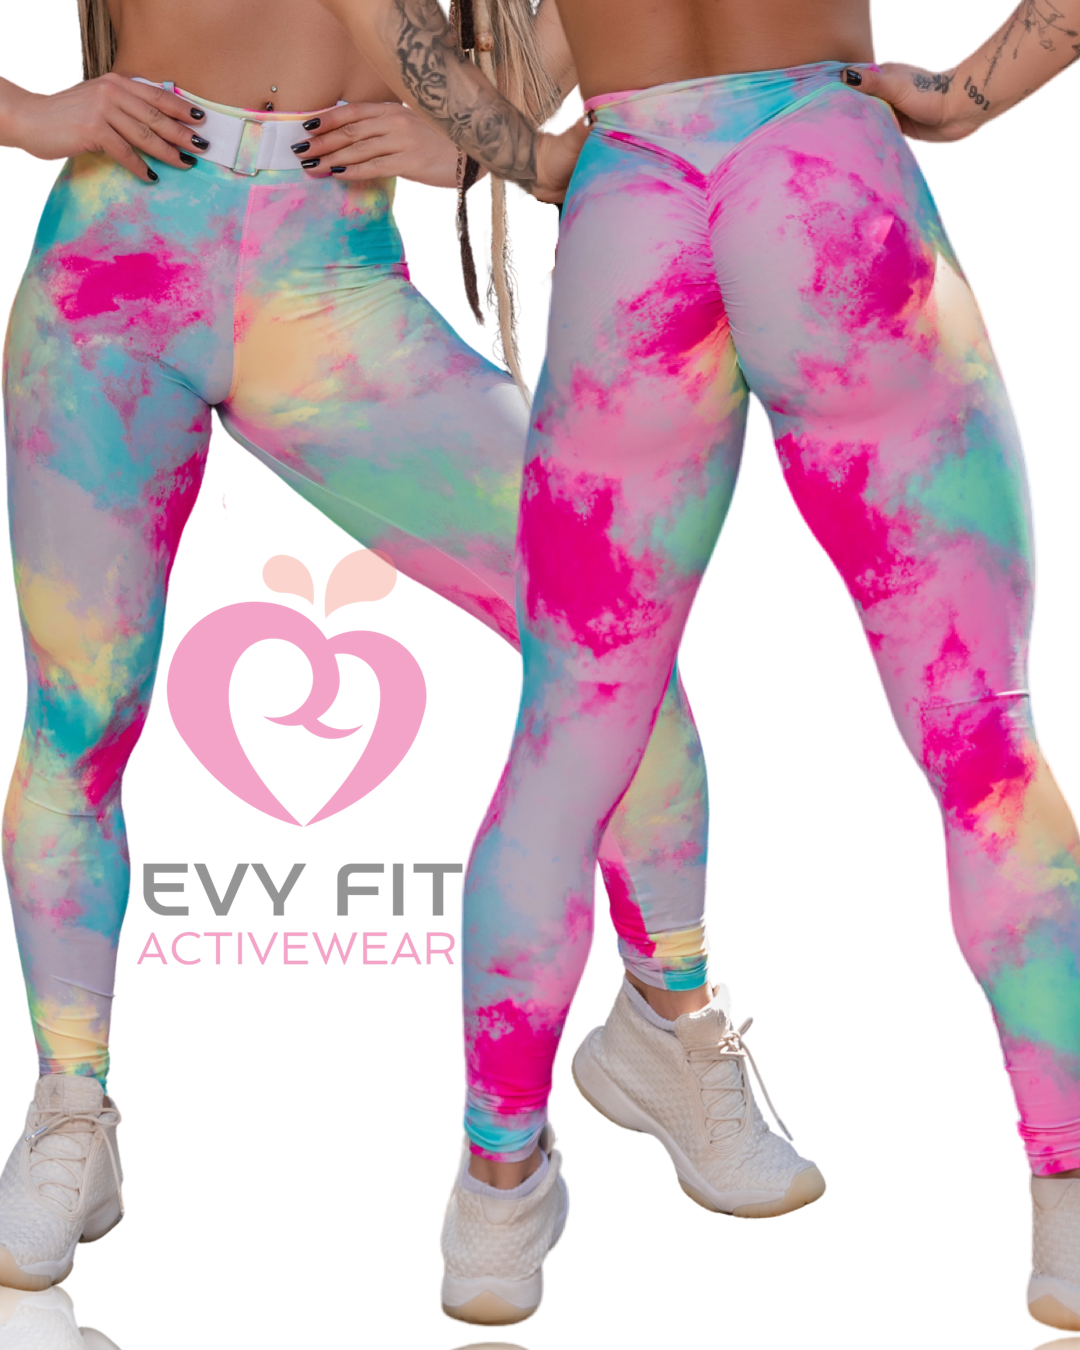 NEW COLORS V SCRUNCH COLLECTION WWW.EVYFITACTIVEWEAR.COM